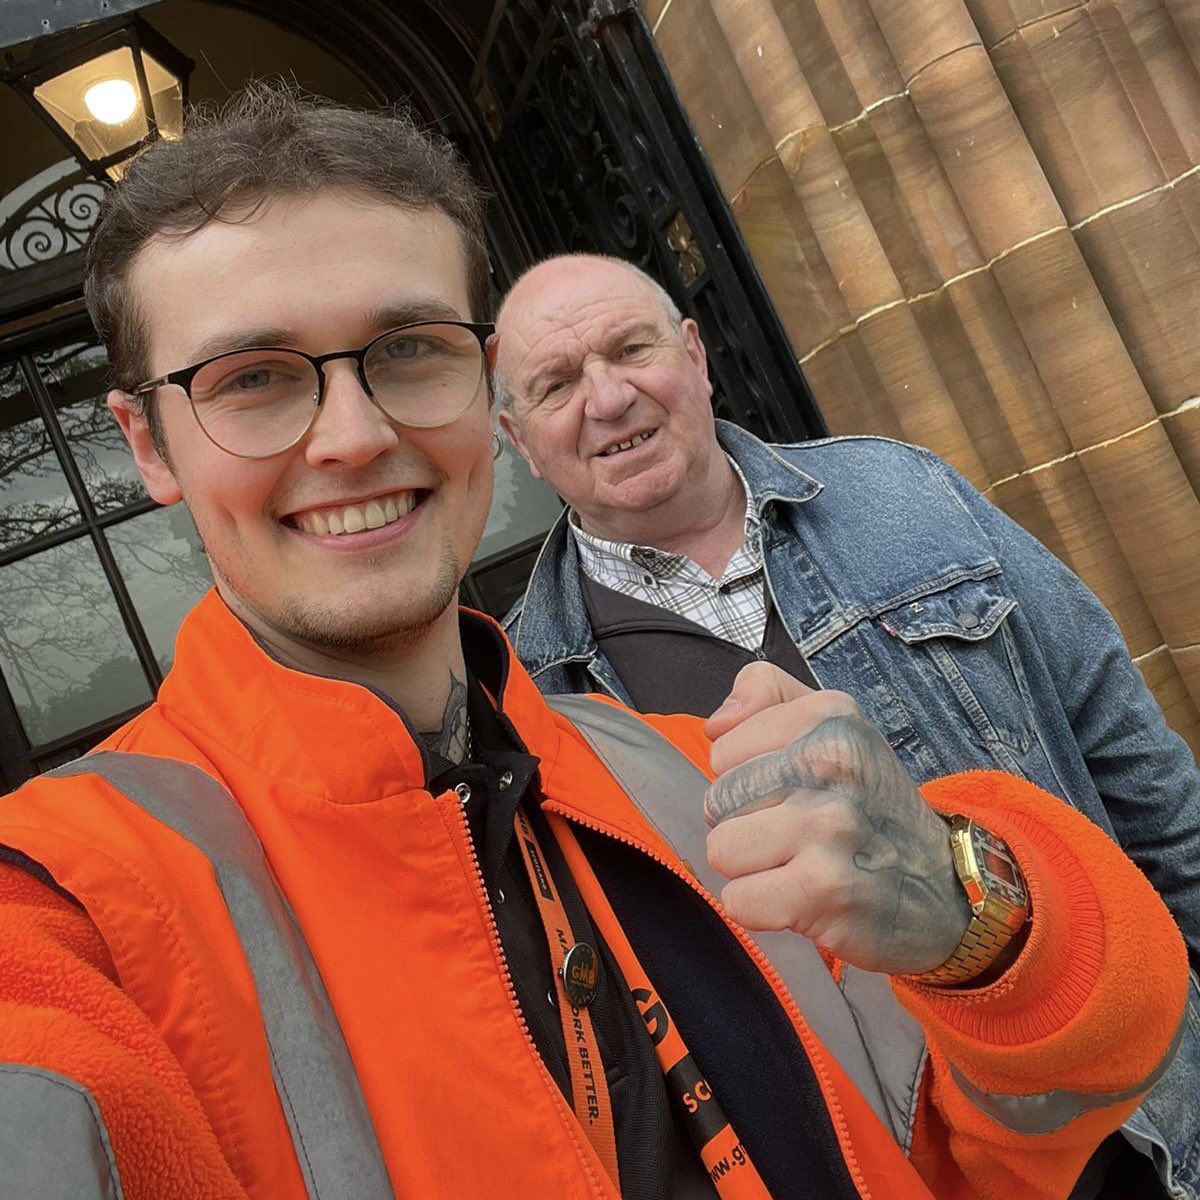 We are proud to confirm that Comrade Nathan Hennerbry, worker, trade unionist and member of the YCL Central Committee @yclbritain, (pictured along with his Election Agent) will be contesting the Clydebank Central Ward for West Dunbartonshire Council on the Communist Party’s…